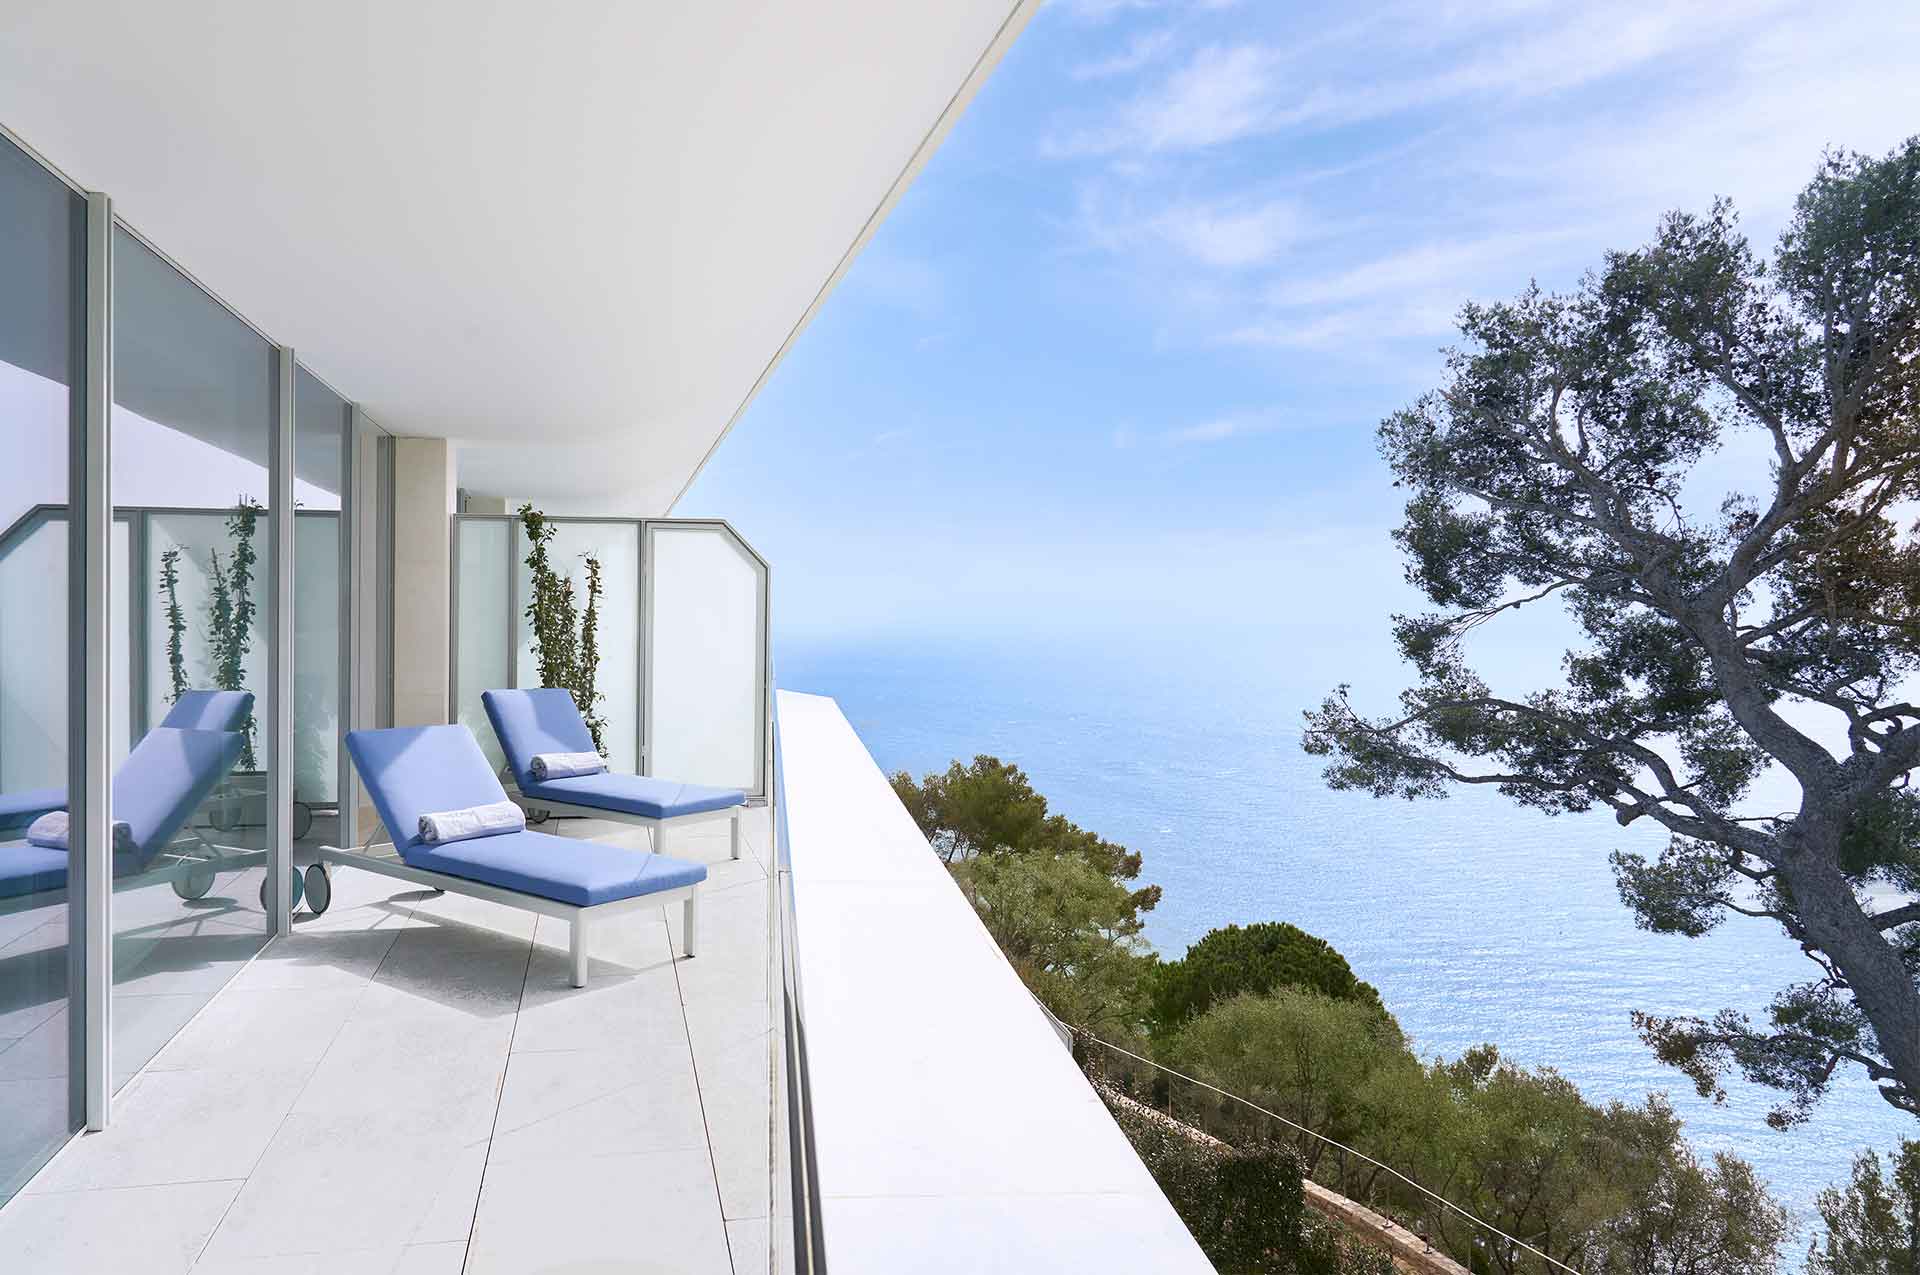 The Sea View Suite balcony overlooks the blue waters and lush nature surrounding the property. Two blue deckchairs rest on the balcony looking over a large curved tree in the garden